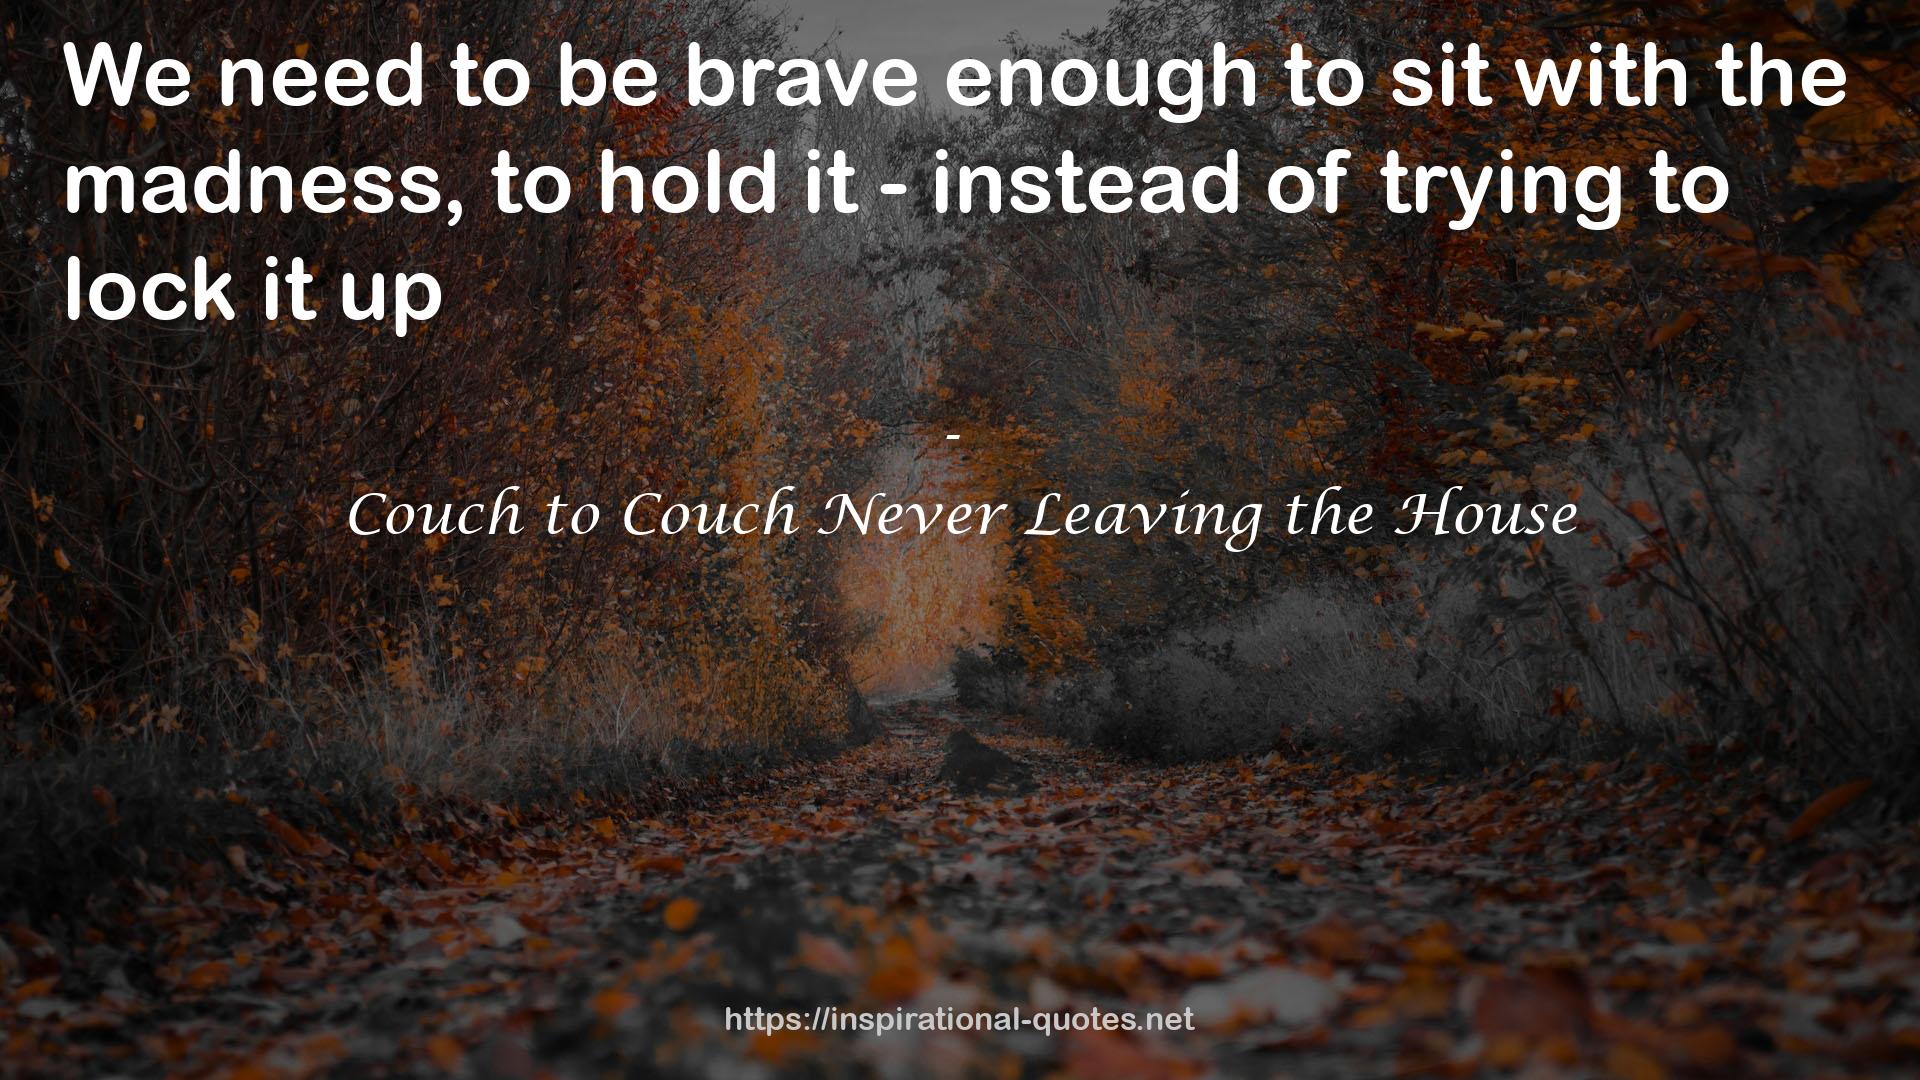 Couch to Couch Never Leaving the House QUOTES